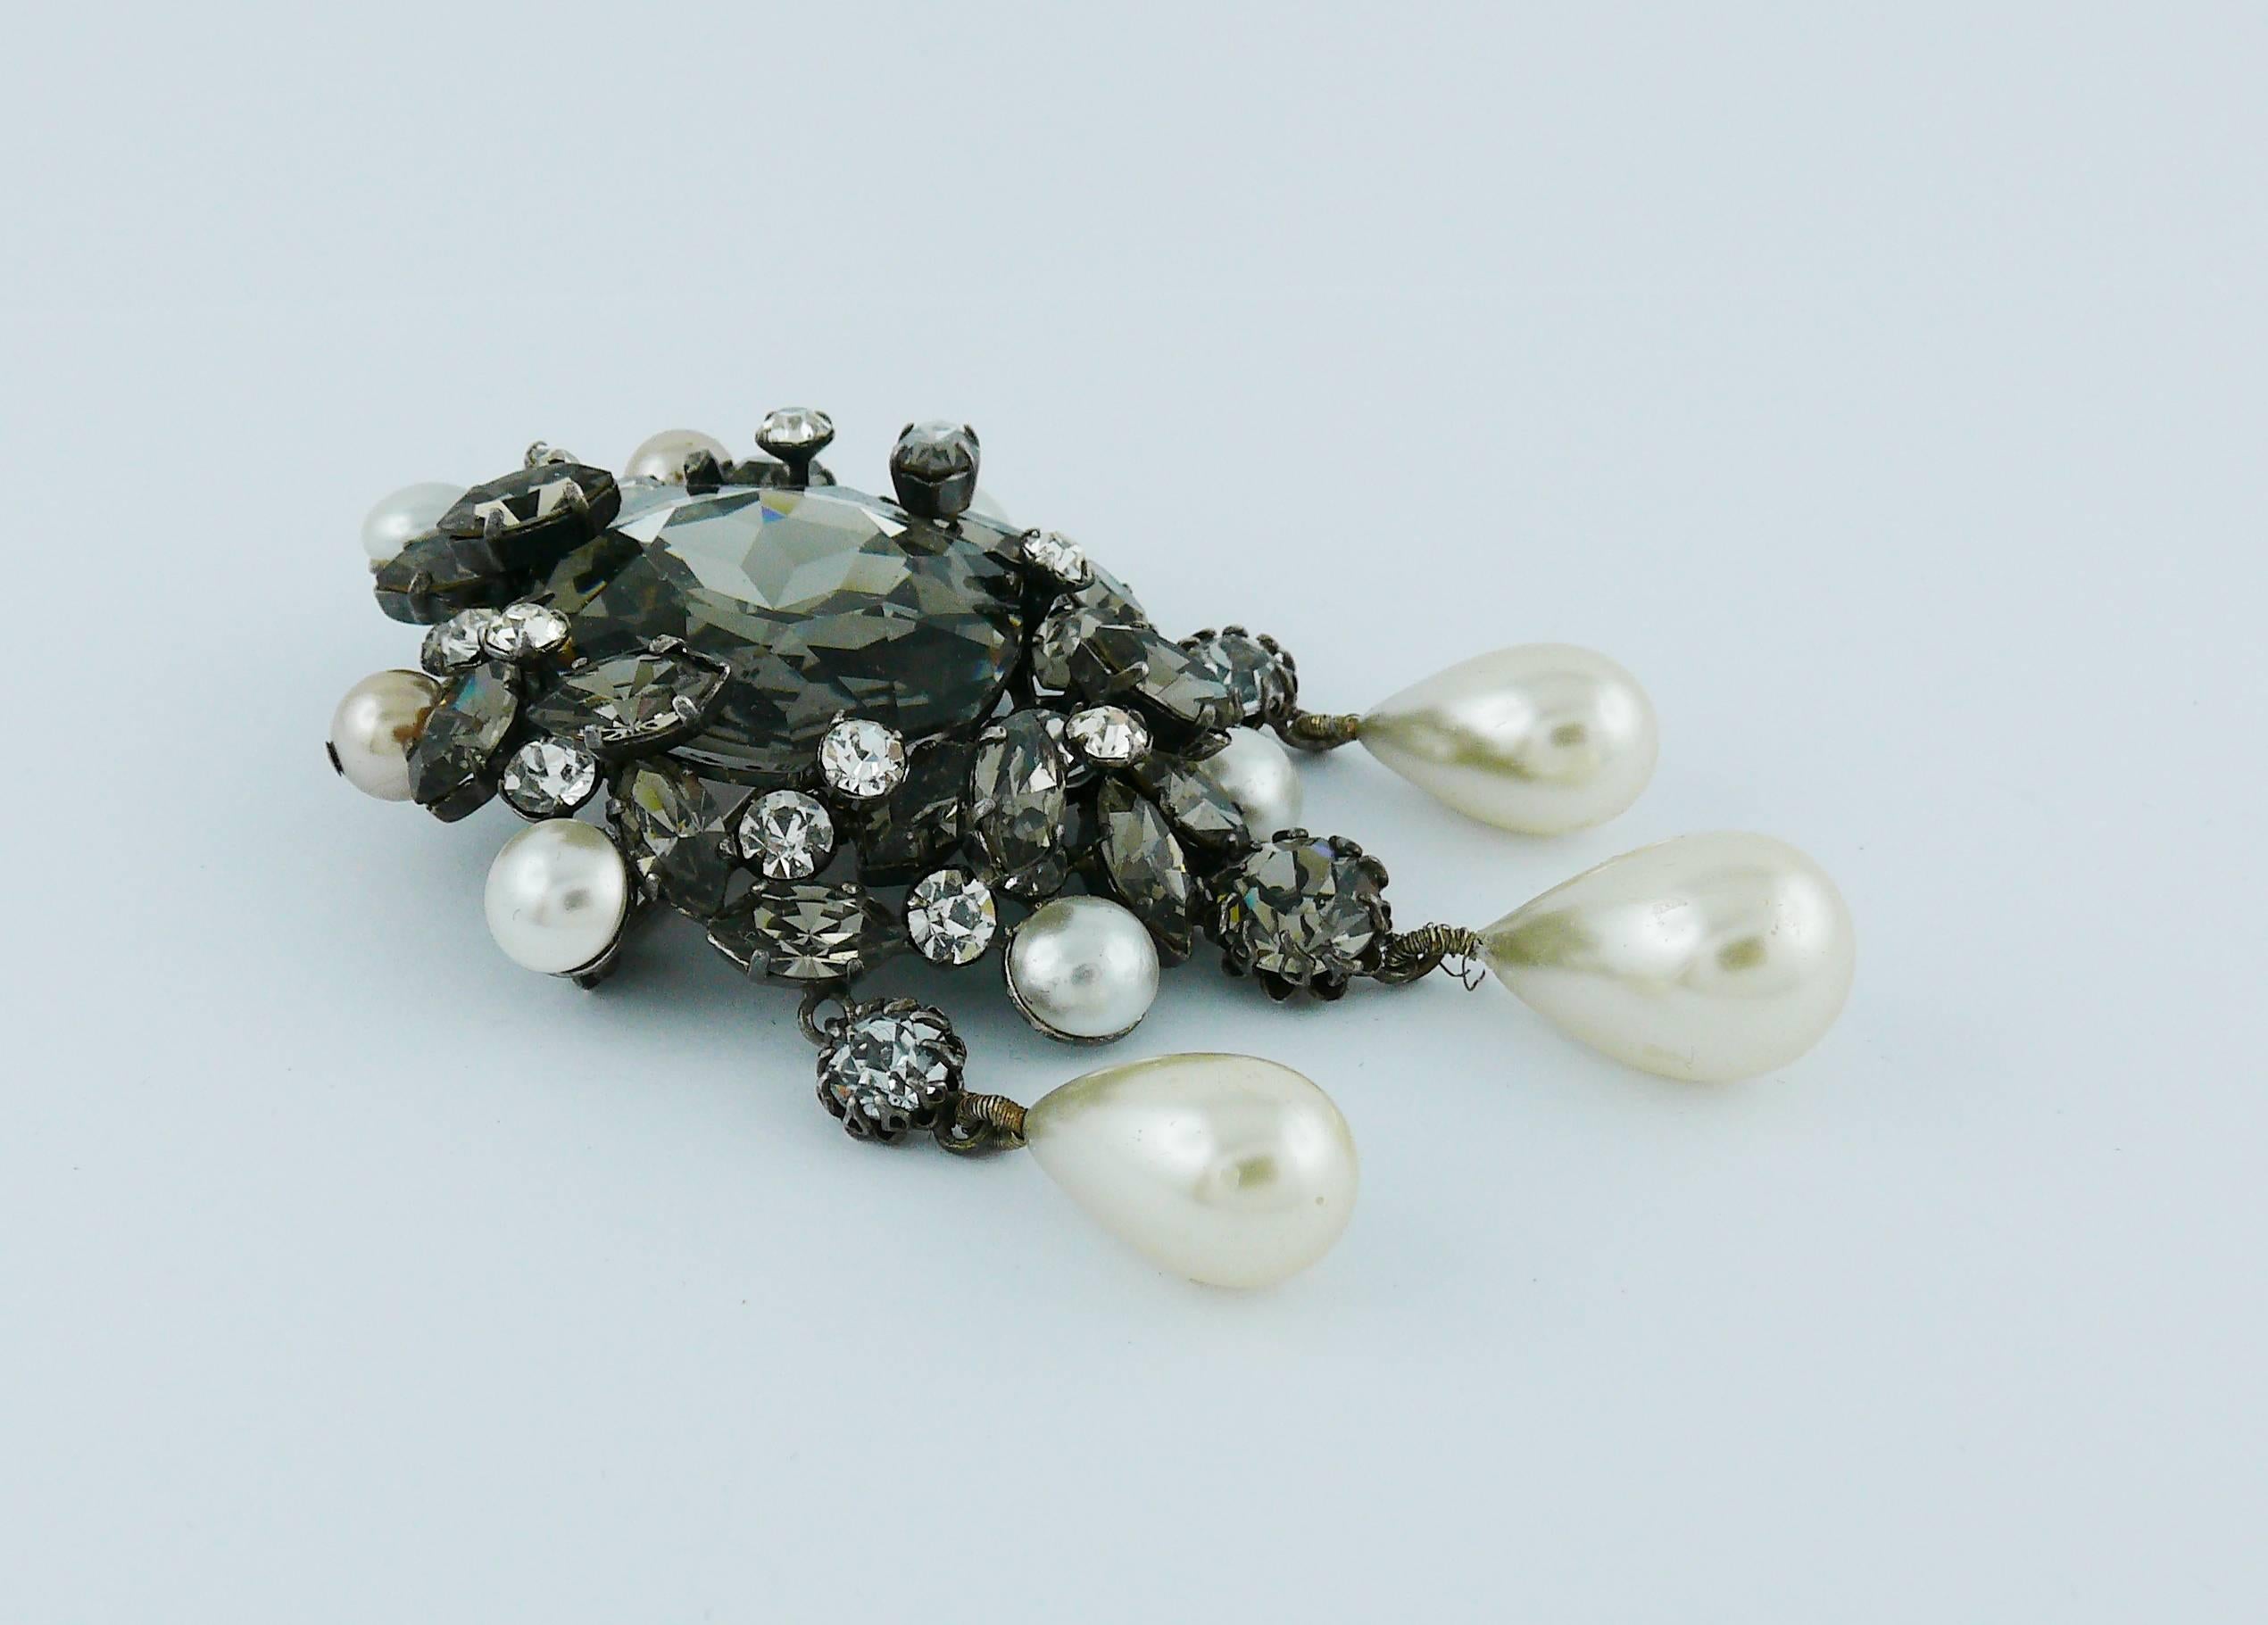 Gorgeous vintage massive brooch/pendant featuring grey/white crystals and glass faux pearl embellishement.

Unsigned.

Indicative measurements : max. width approx. 4.5 cm (1.77 inches) / max. height approx. 8.4 cm (3.31 inches).

JEWELRY CONDITION